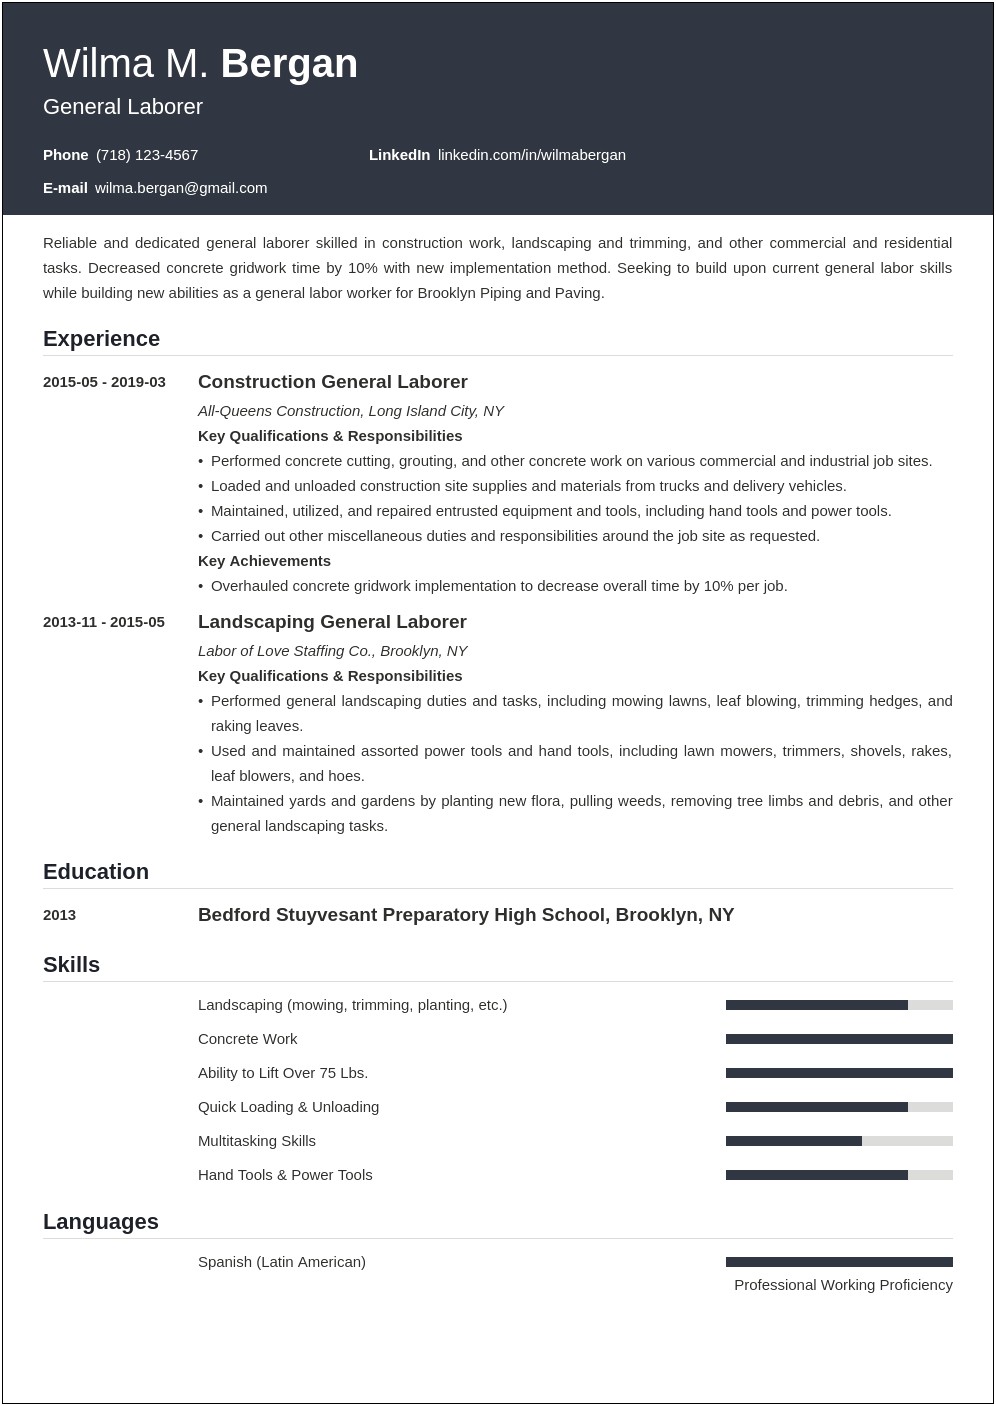 General Labor Resume Objective Statements